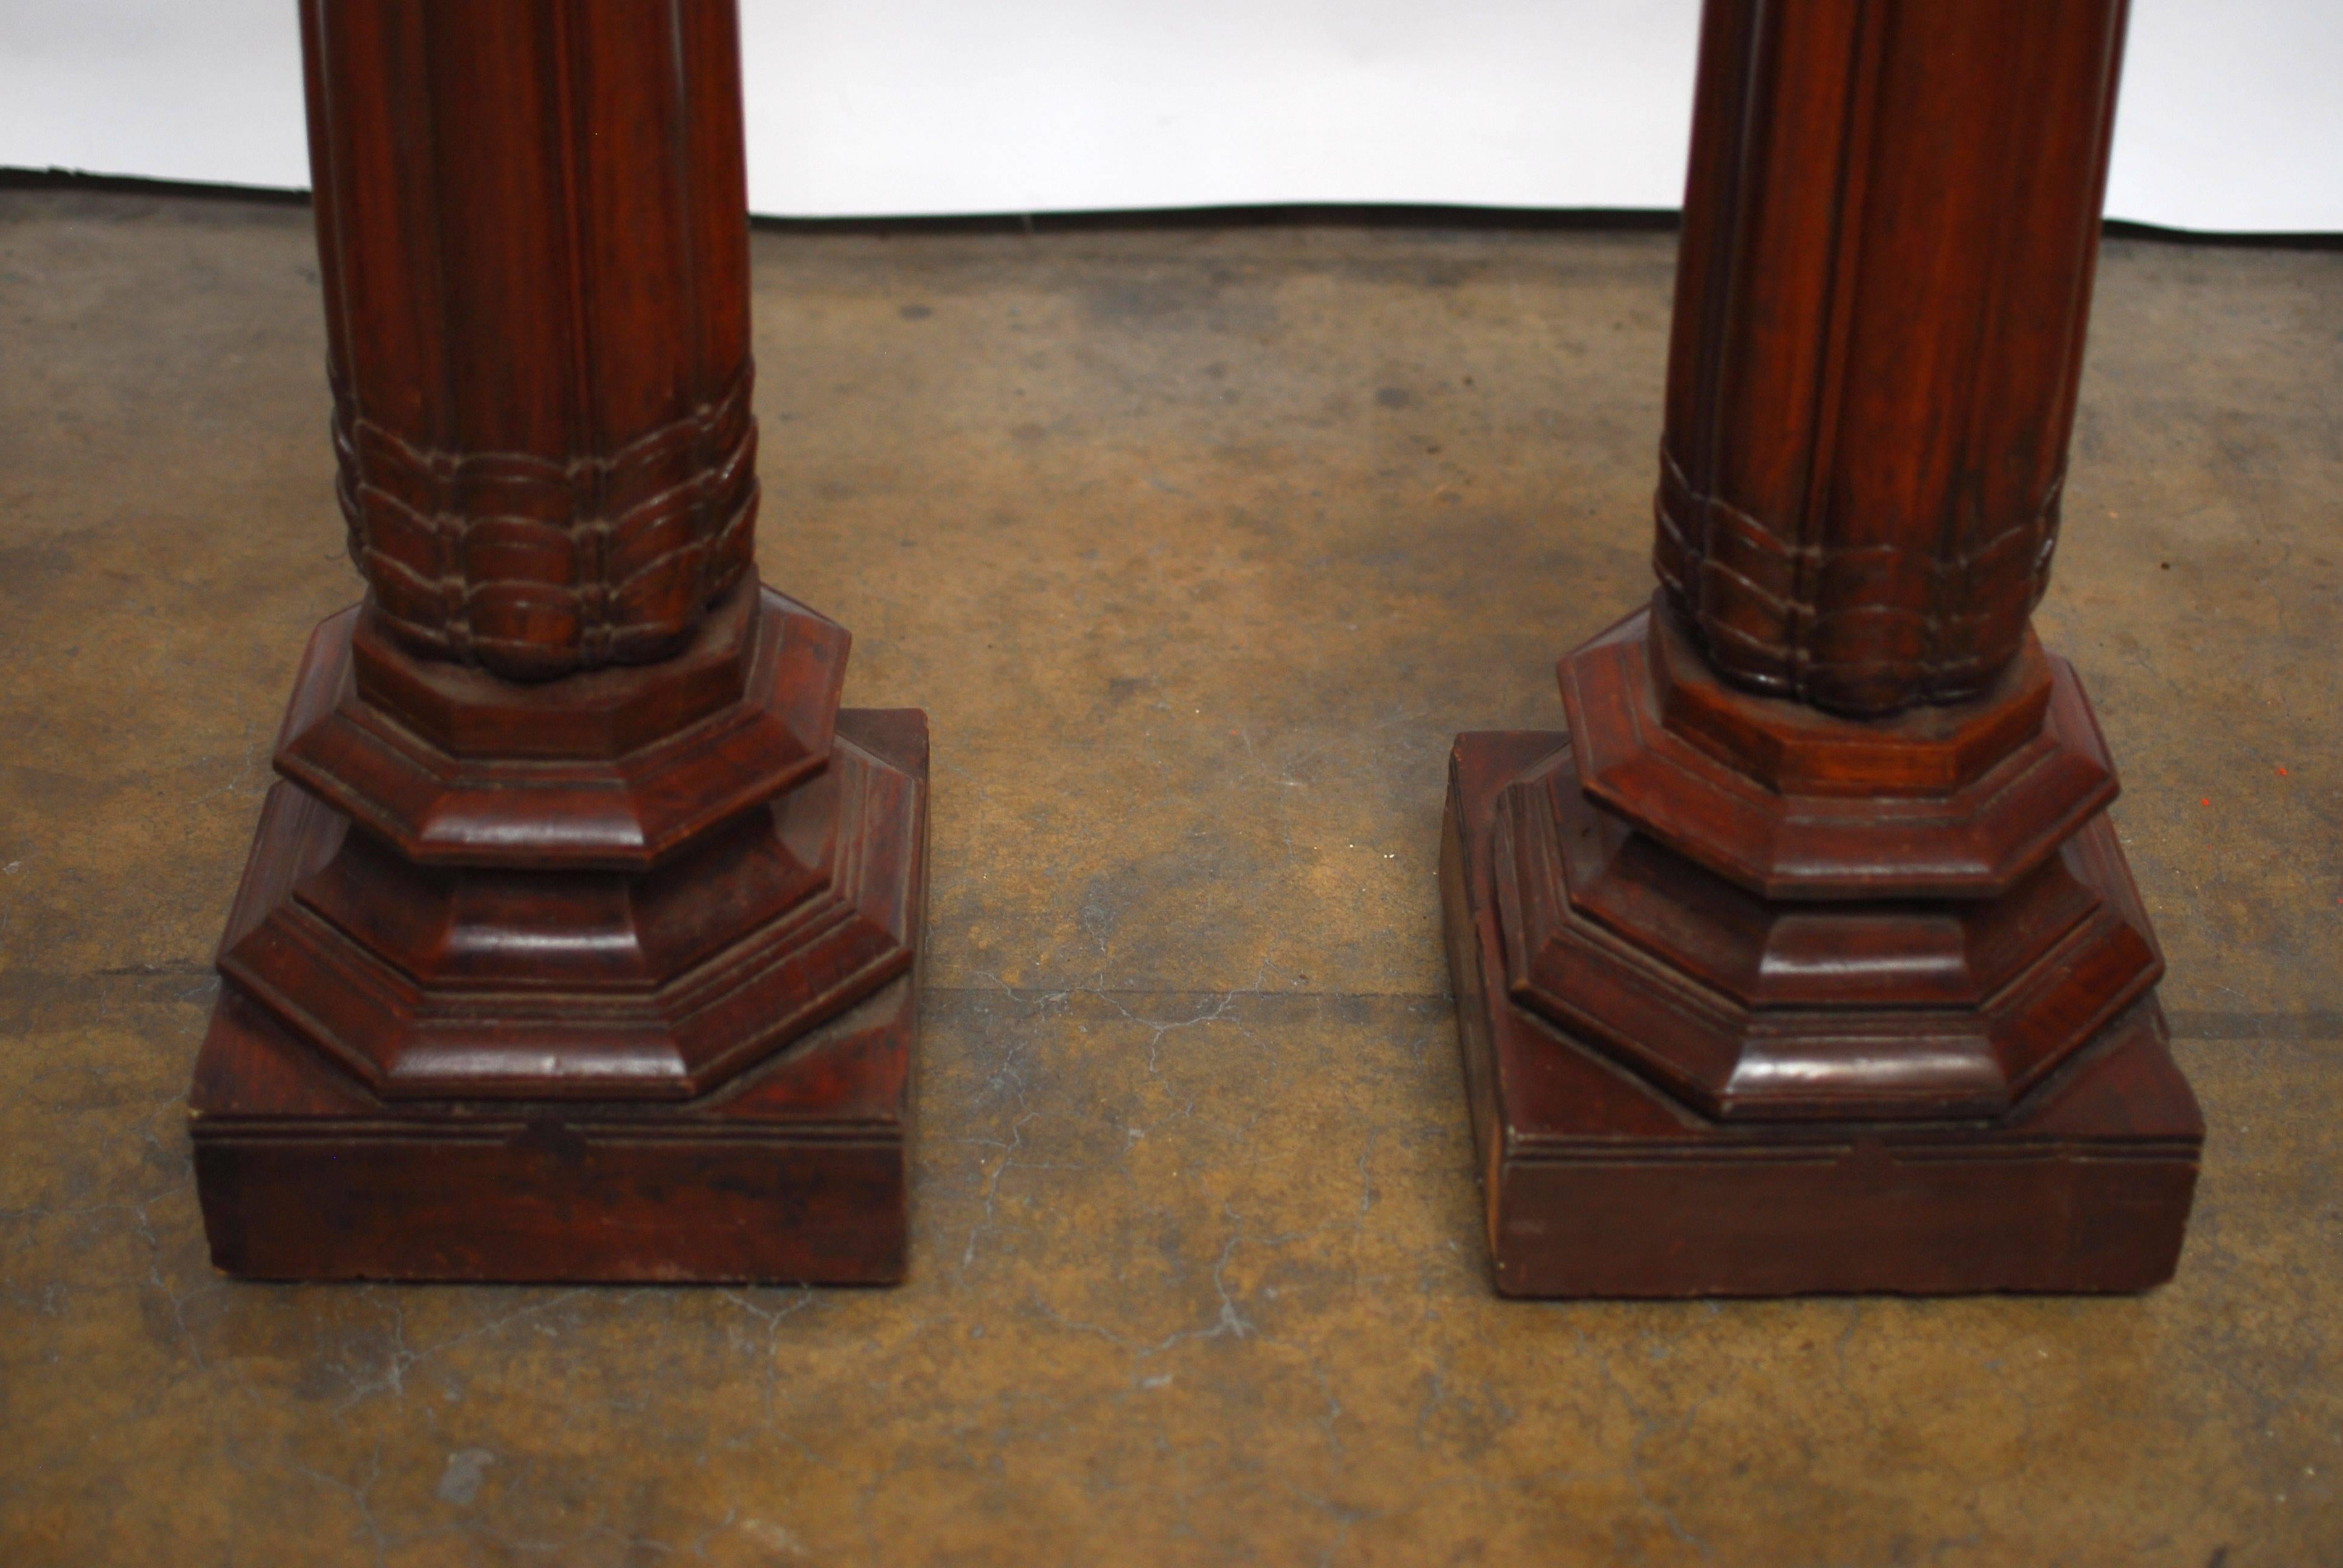 Antique pair of carved architectural columns from Burma made of solid teak wood. Roman style base with a tapered, reeded pillar that terminates with a flat shelf capitol. Finished in a rich mahogany stain. Made in a British Colonial style.
